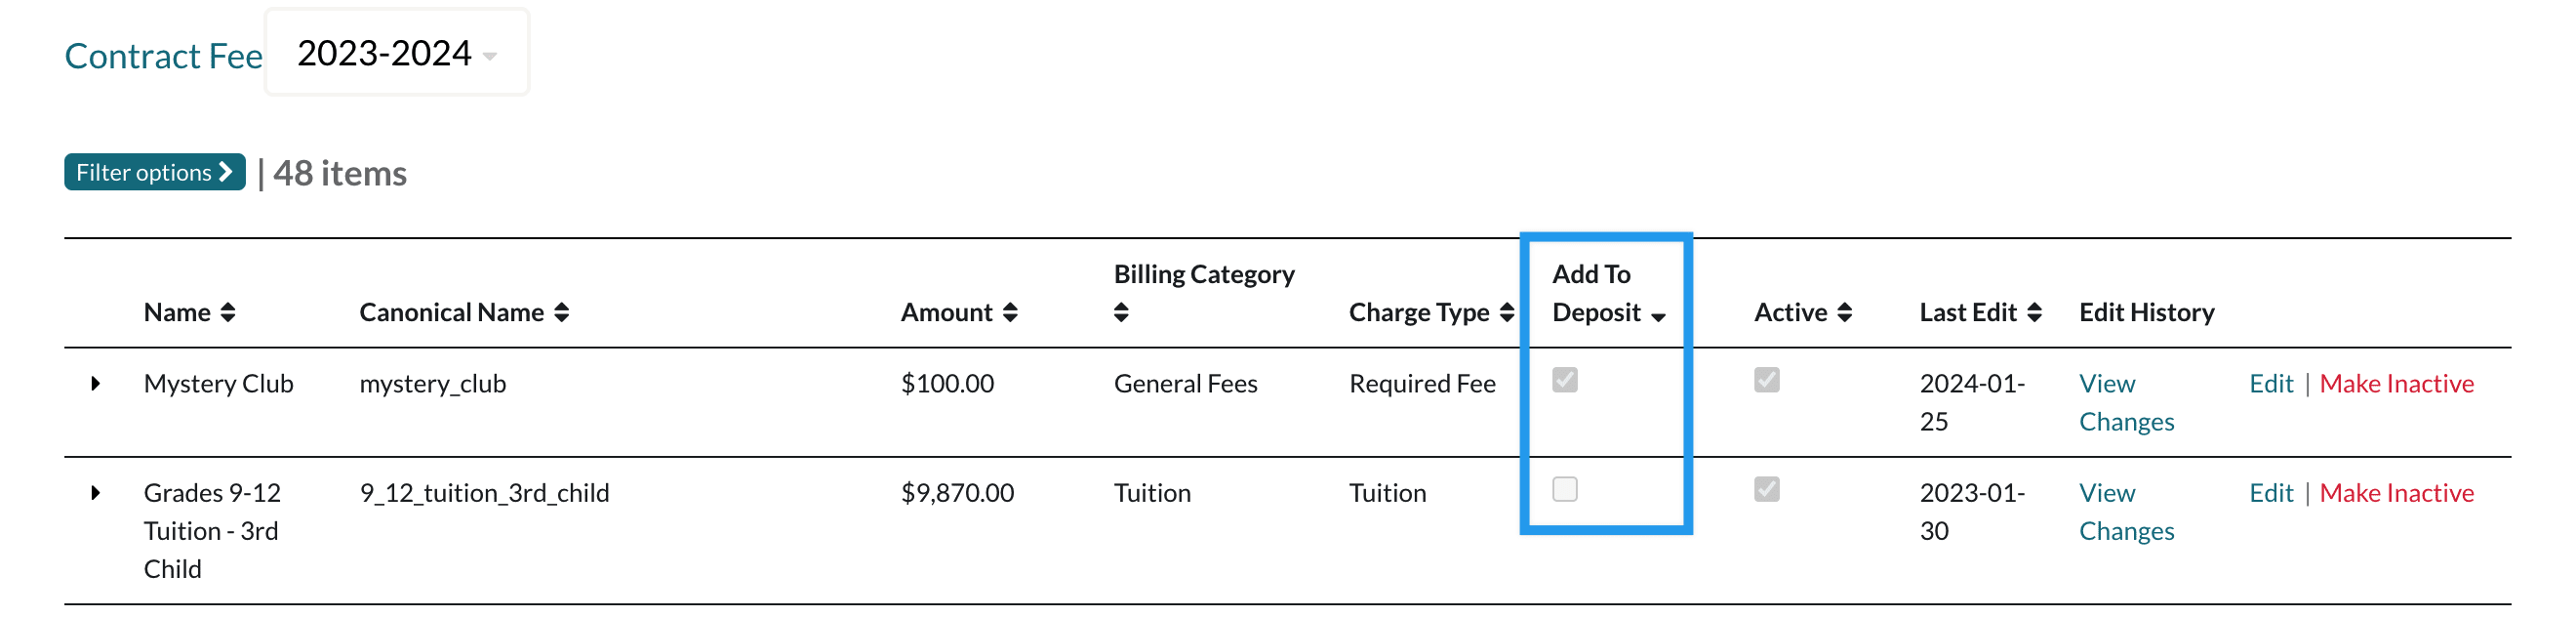 Contract Fees Page